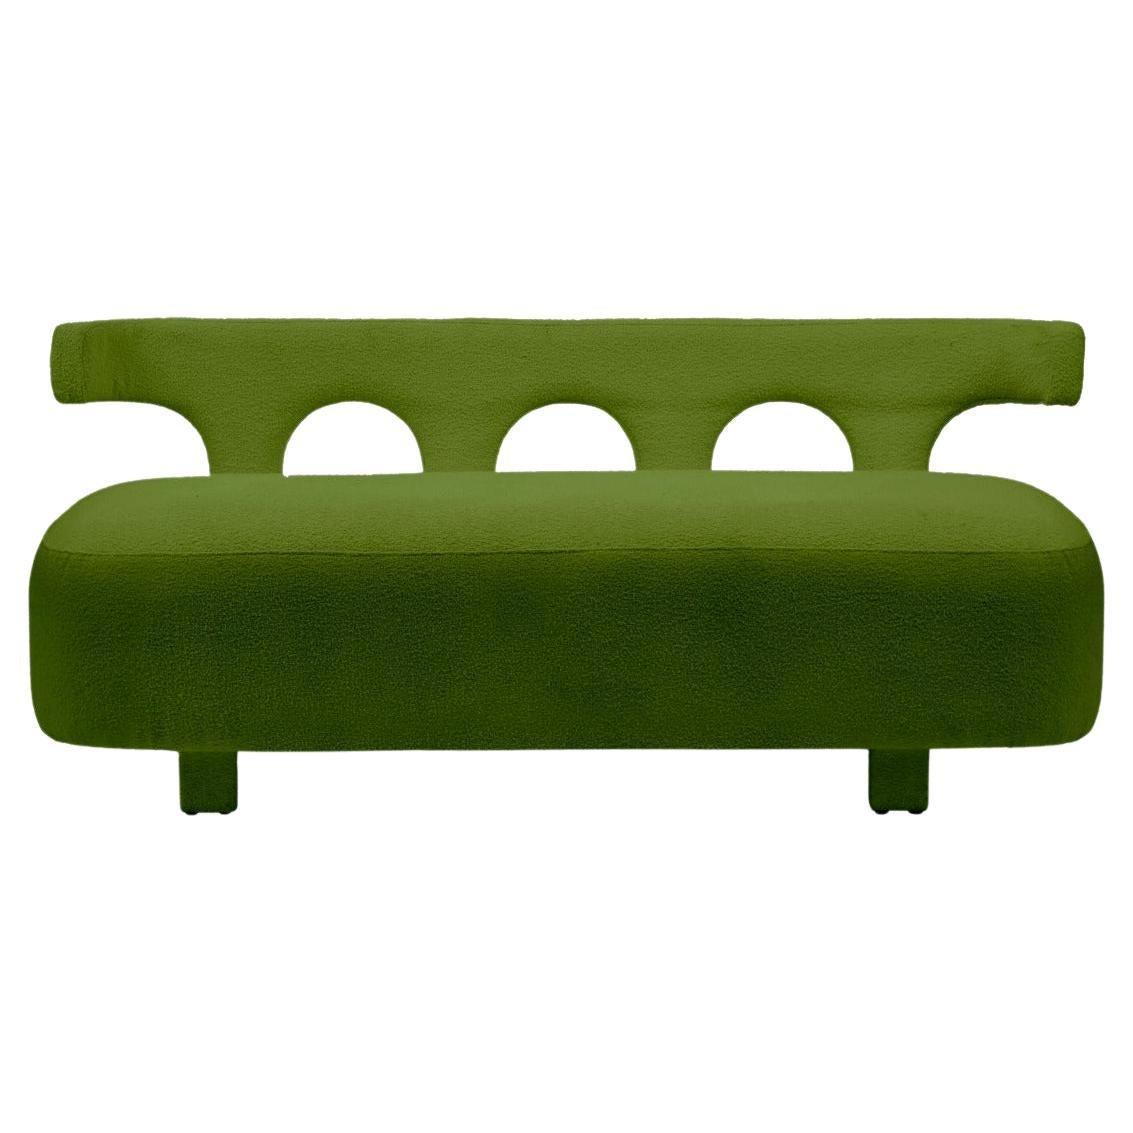 Olive Green Curvy Upholstered Sofa Inspired by Egypt's Nubian Architecture For Sale